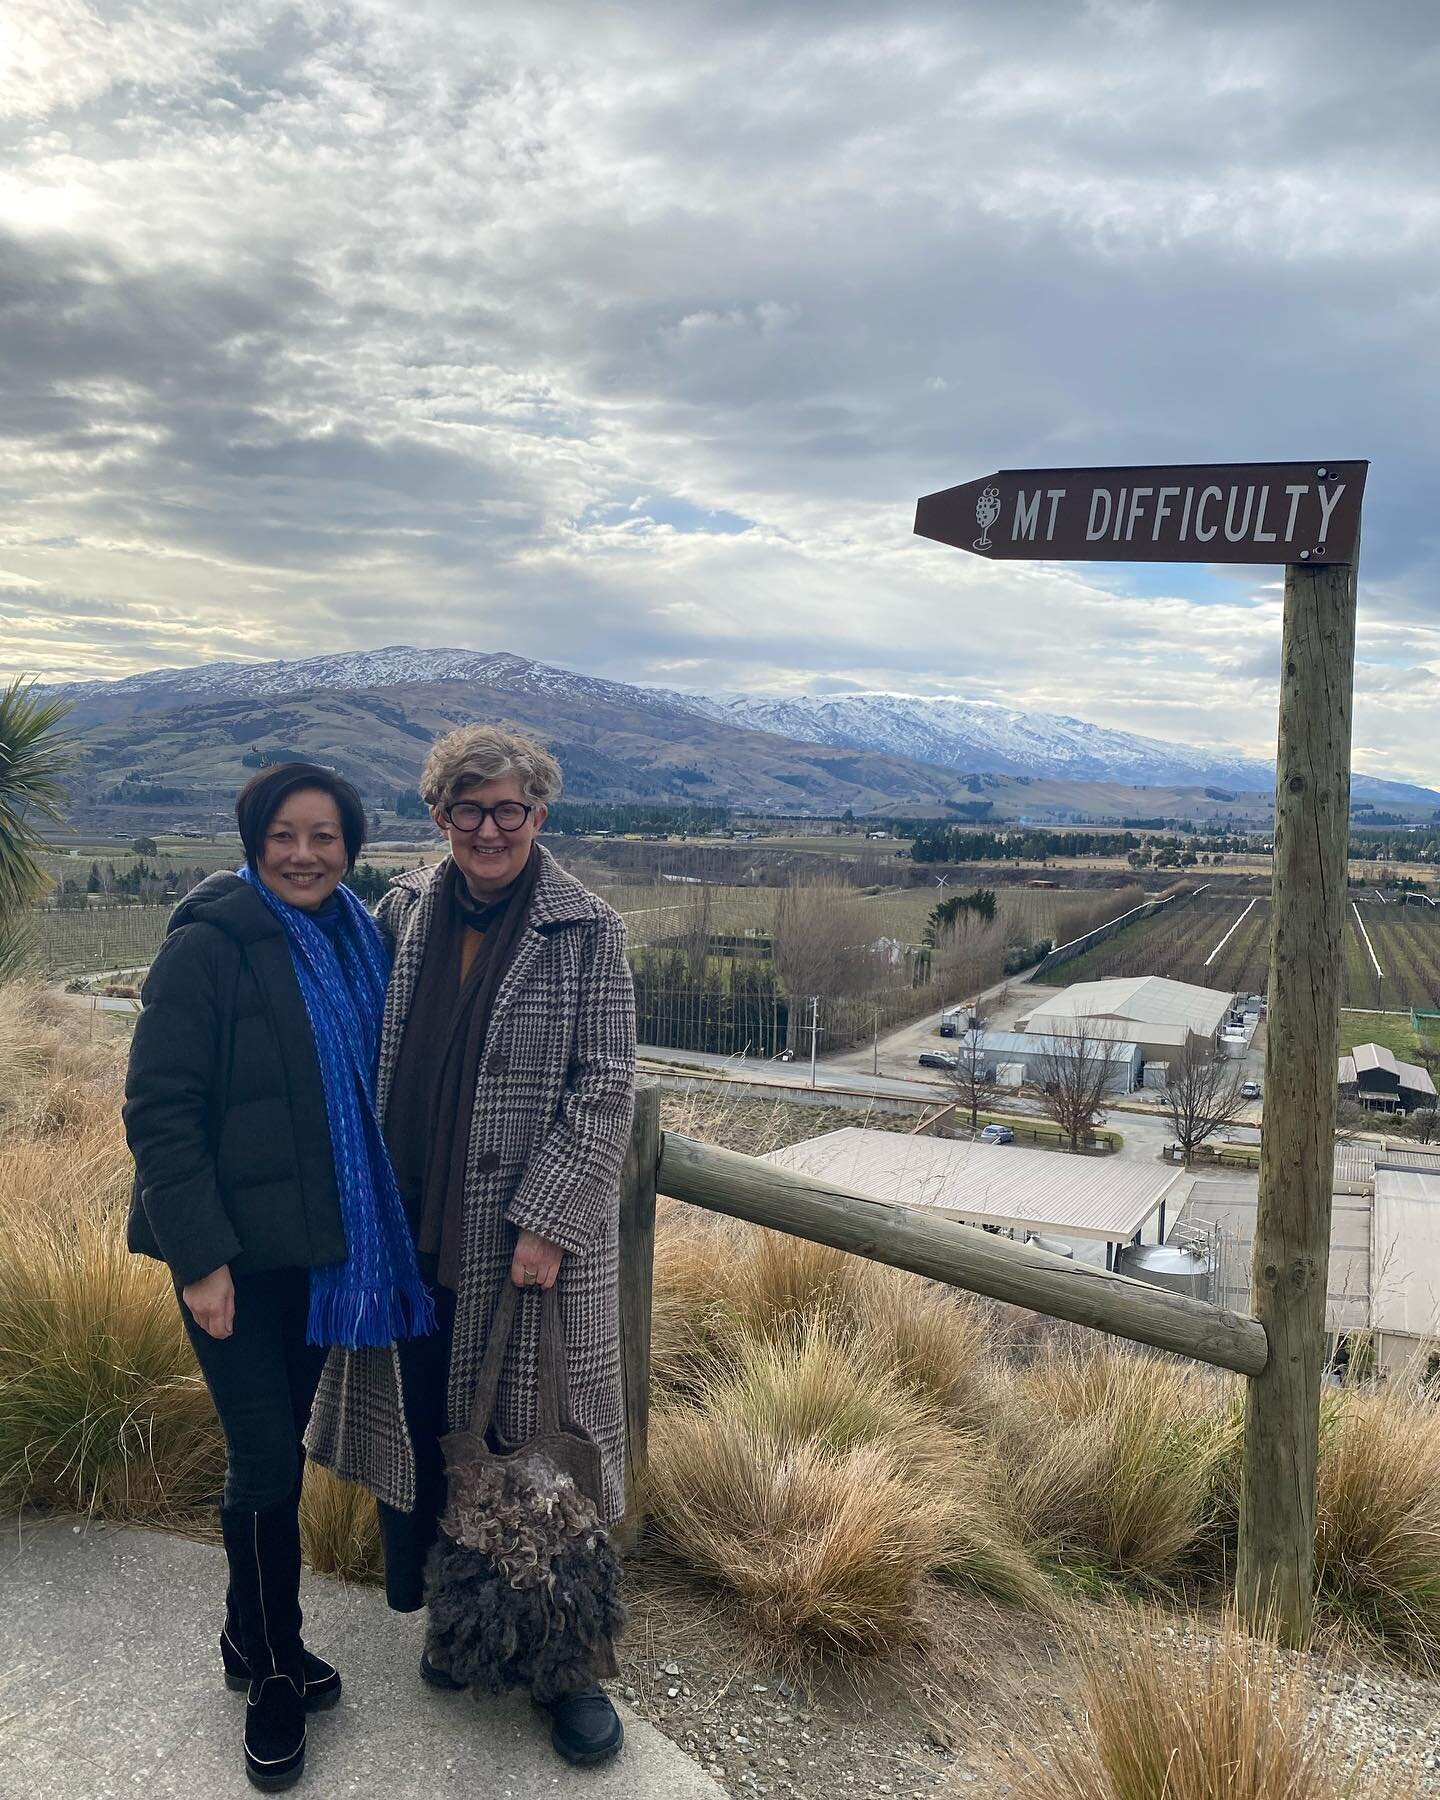 Adventures in the stunning landscape of Central Otago. Denise and I visiting Mt Difficulty bindery. Bannockburn with its historic gold mining history shaped this land with its barren hillscape and majestic mountains.
This is such a special part of Ne